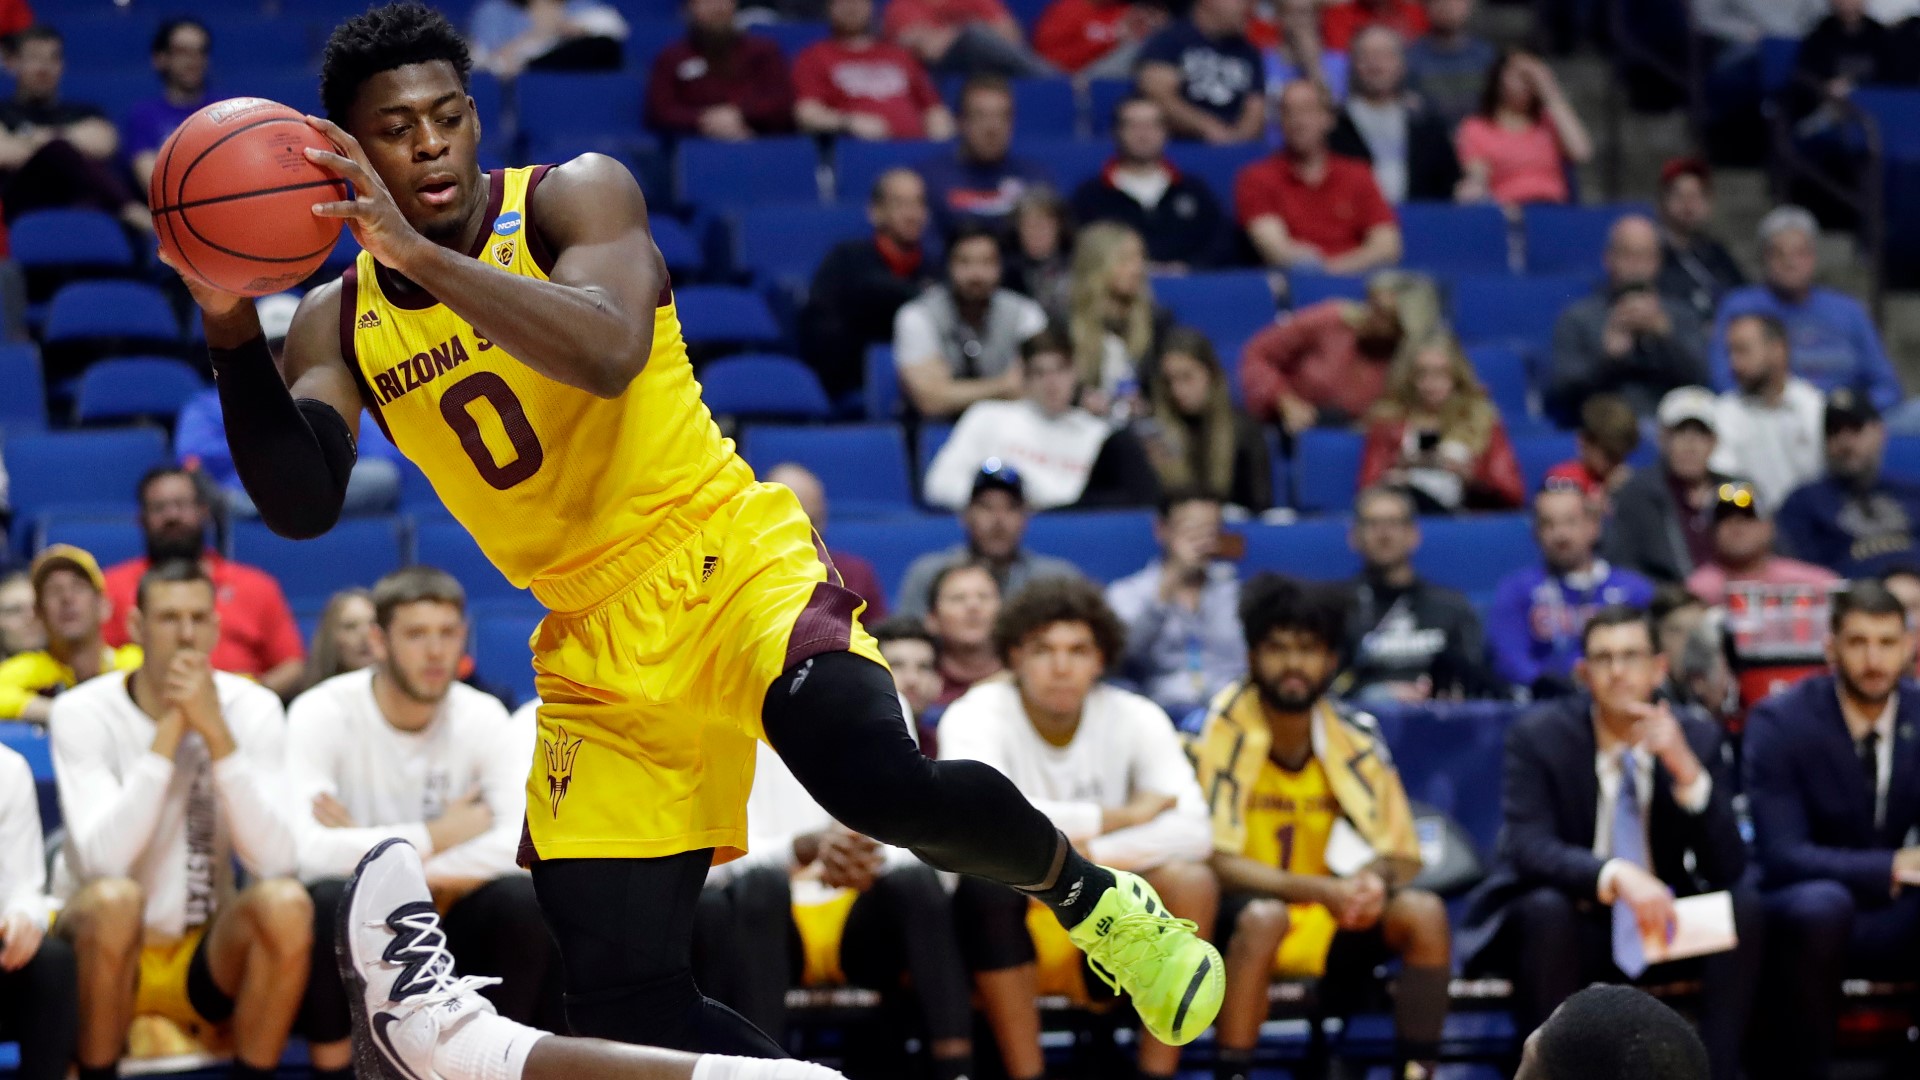 Former ASU Sun Devil Luguentz Dort was one of the more exciting players ASU has had in a long time, which is why it came as no surprise when Dort declared for the NBA Draft.